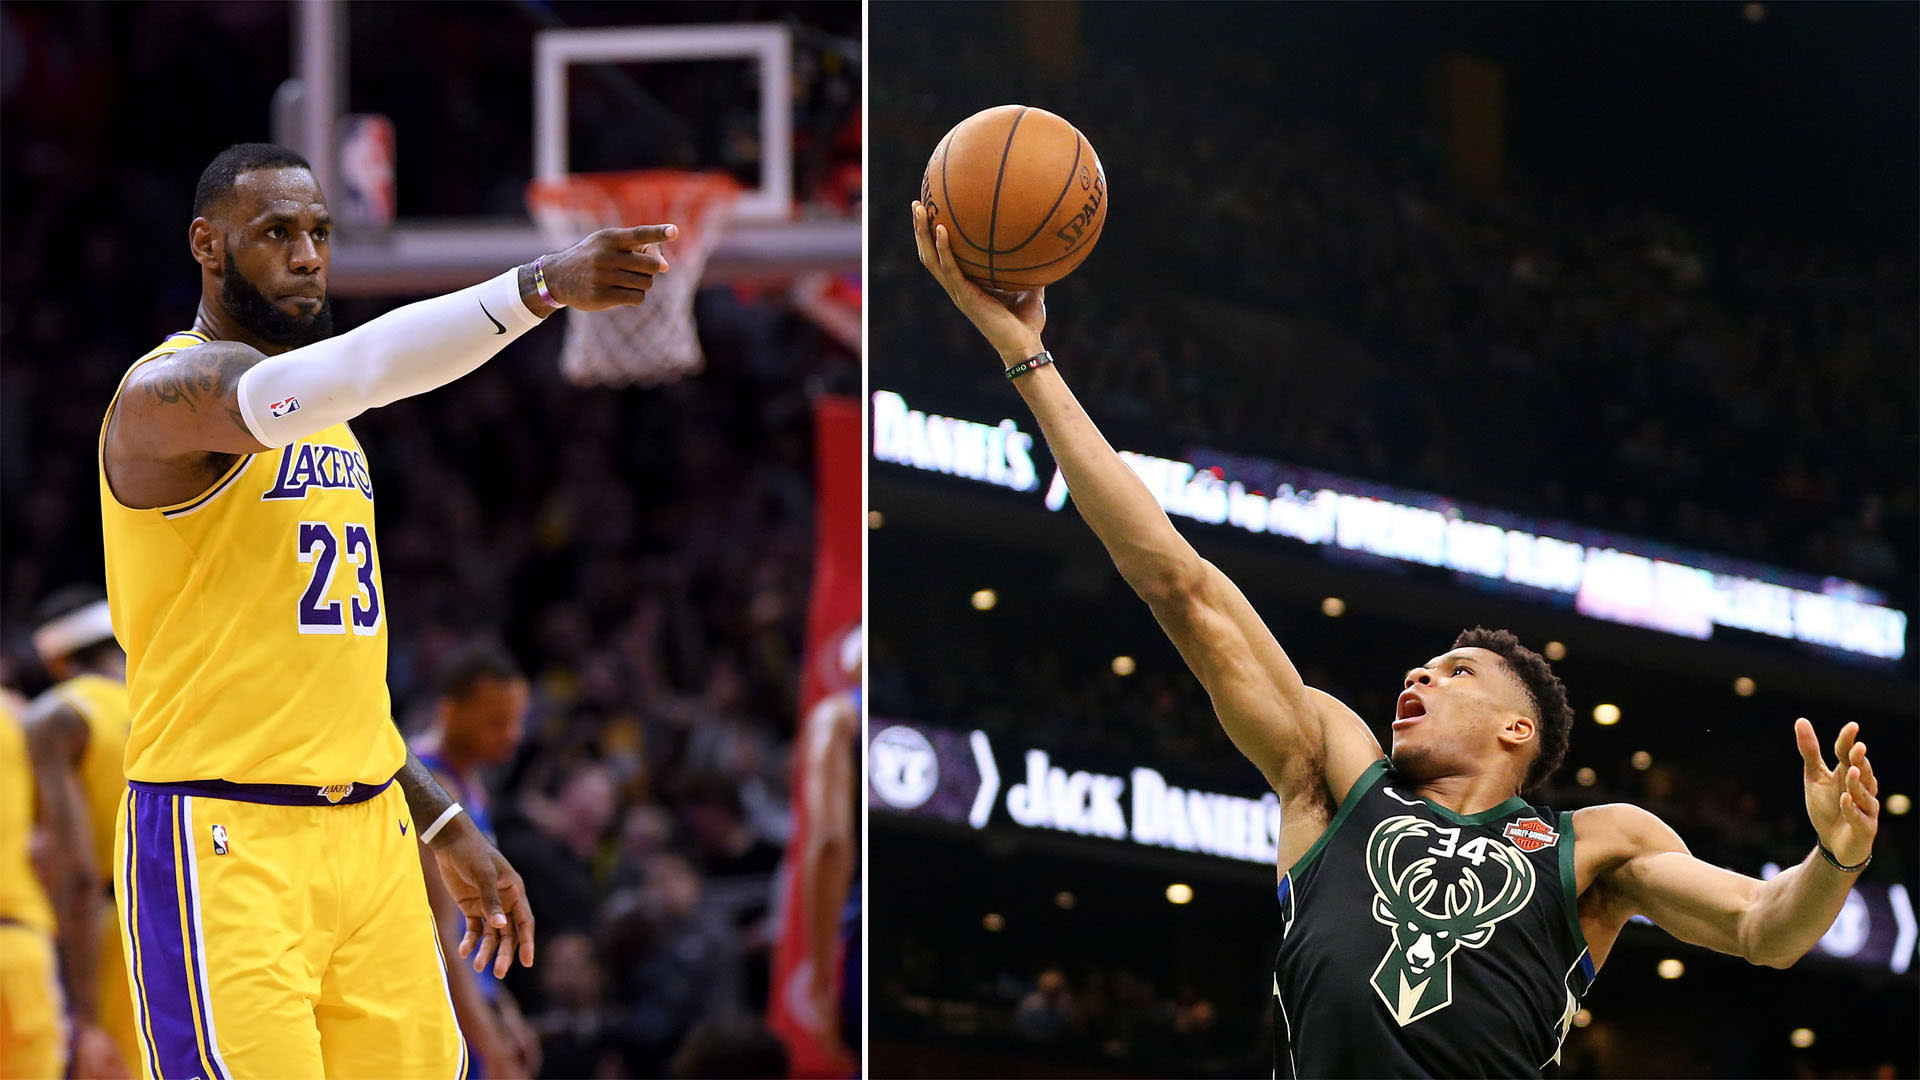 NBA All-Star 2019: Team LeBron vs. Team Giannis by the numbers